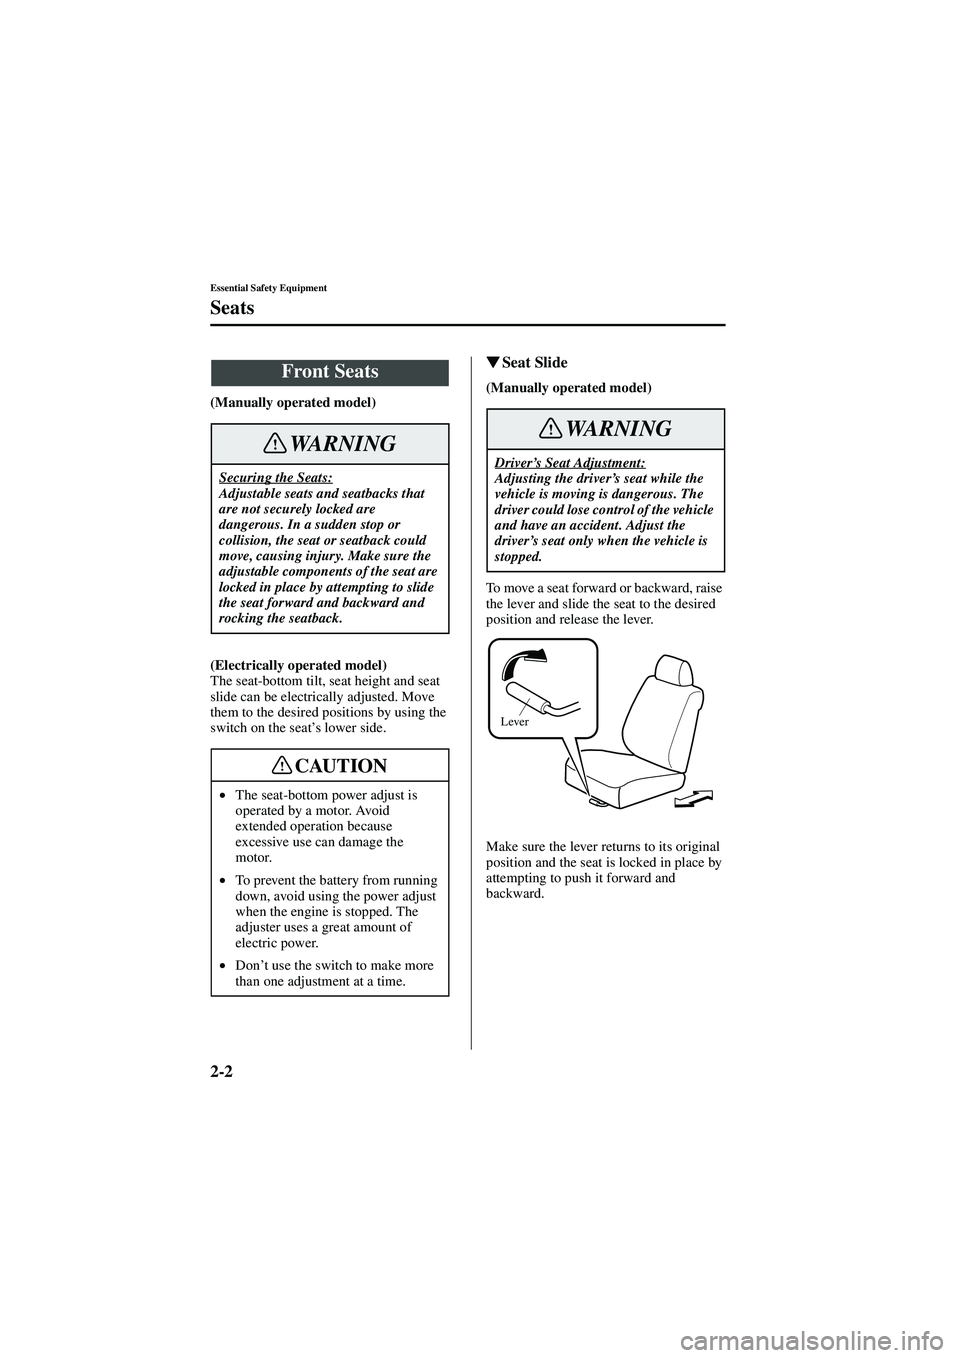 MAZDA MODEL 626 2002  Owners Manual 2-2
Essential Safety Equipment
Form No. 8Q50-EA-01G
Seats
(Manually operated model)
(Electrically operated model)
The seat-bottom tilt, seat height and seat 
slide can be electrically adjusted. Move 
